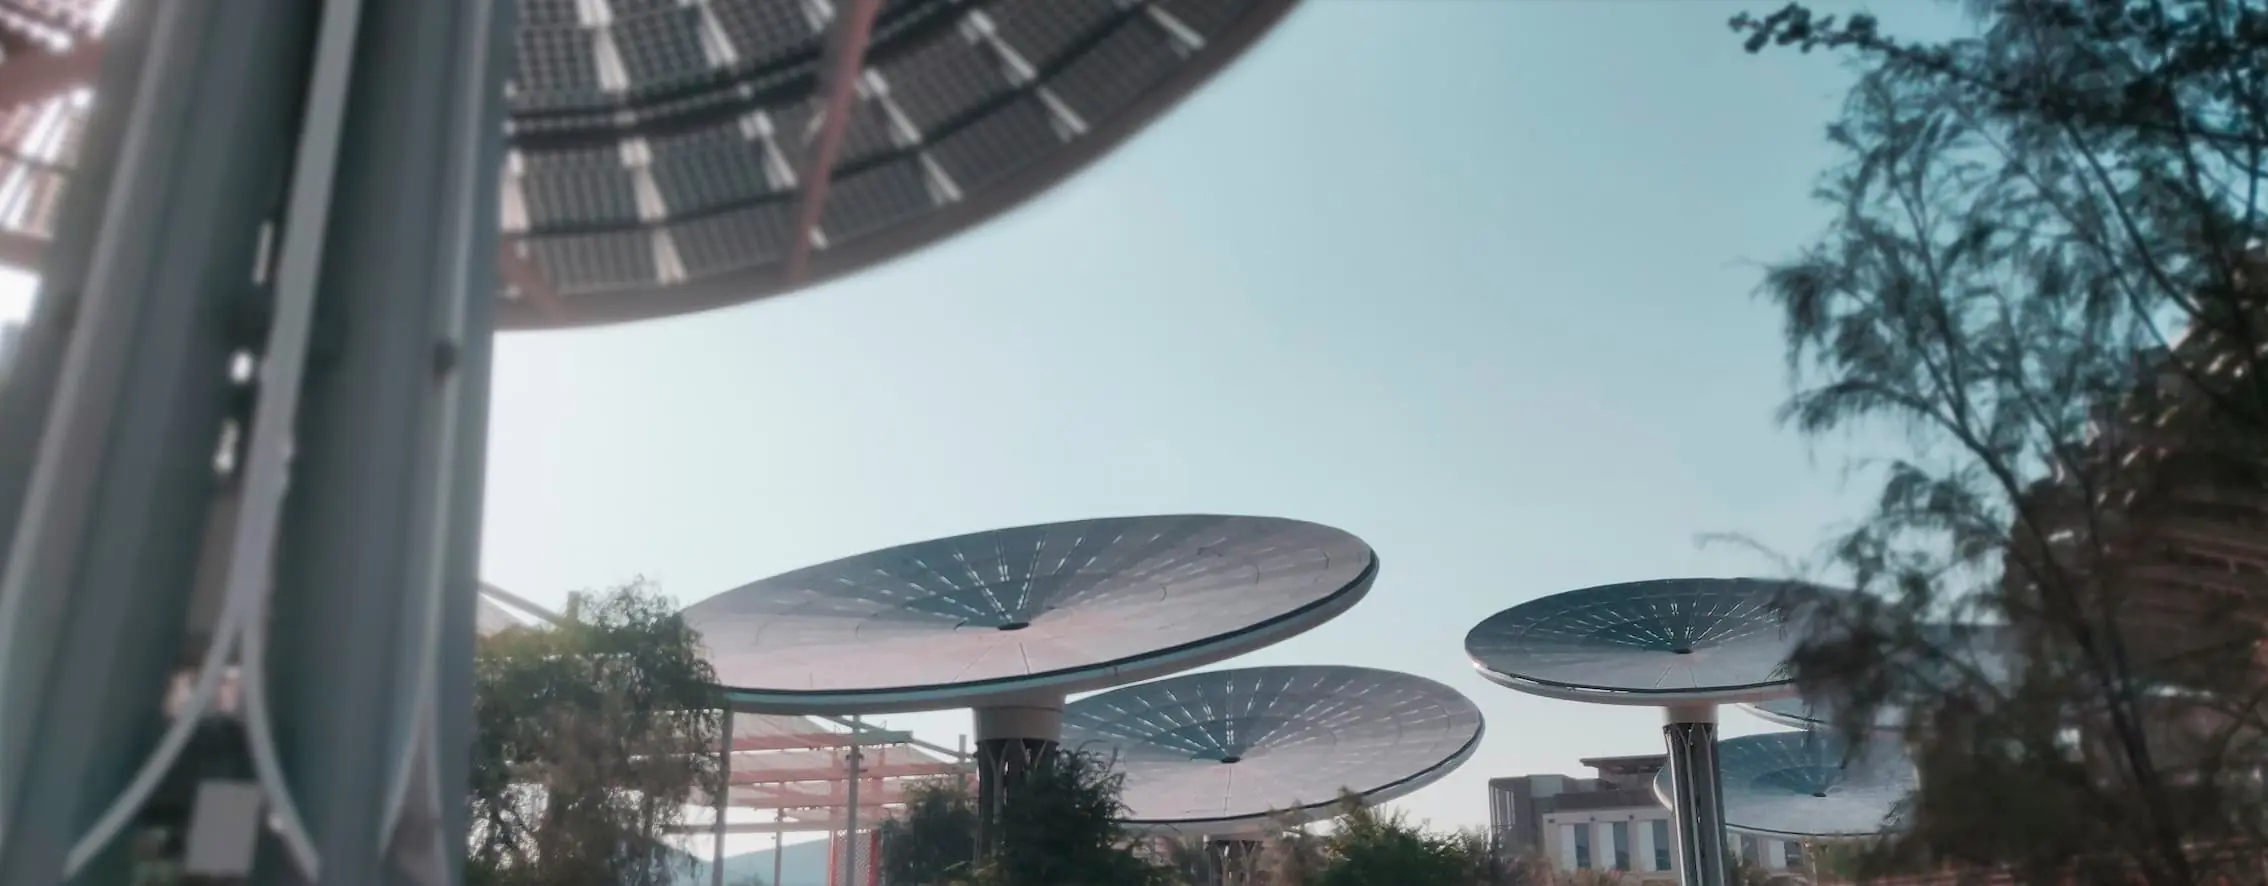 Structures at Expo 2020 designed to provide shade resembling an radio telescope array